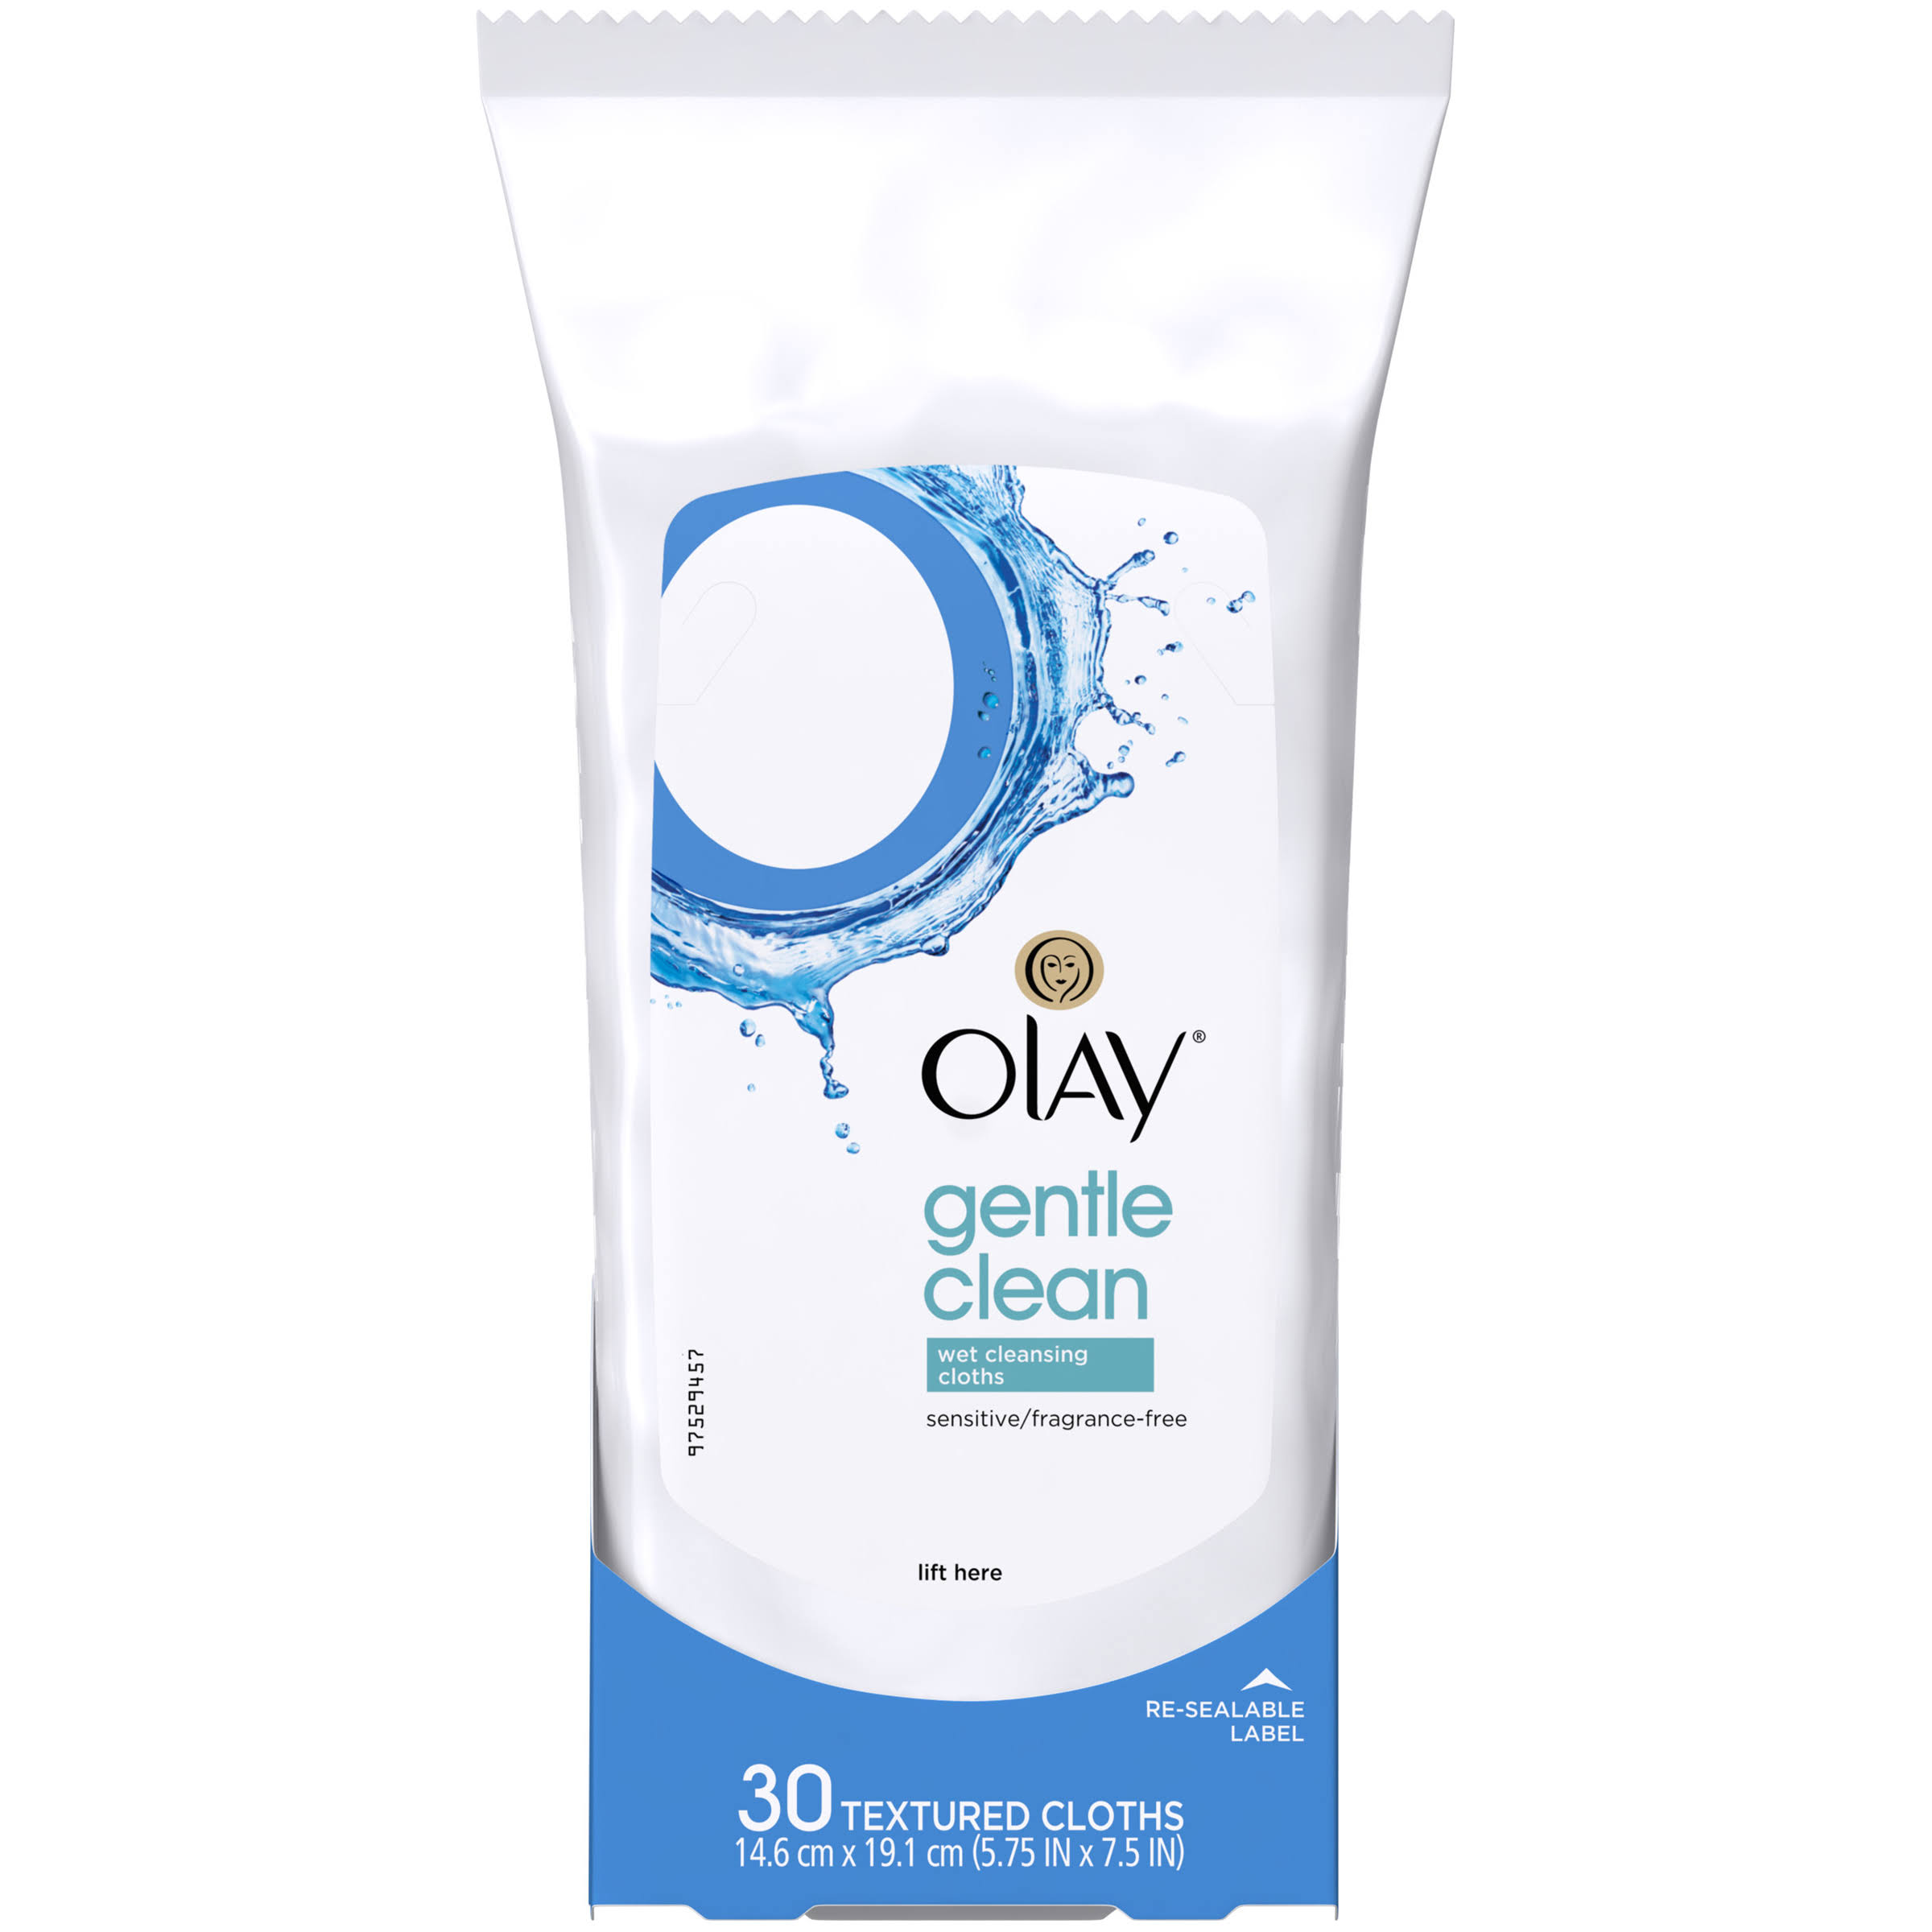 Olay Gentle Clean Wet Cleansing Cloths - 30pk